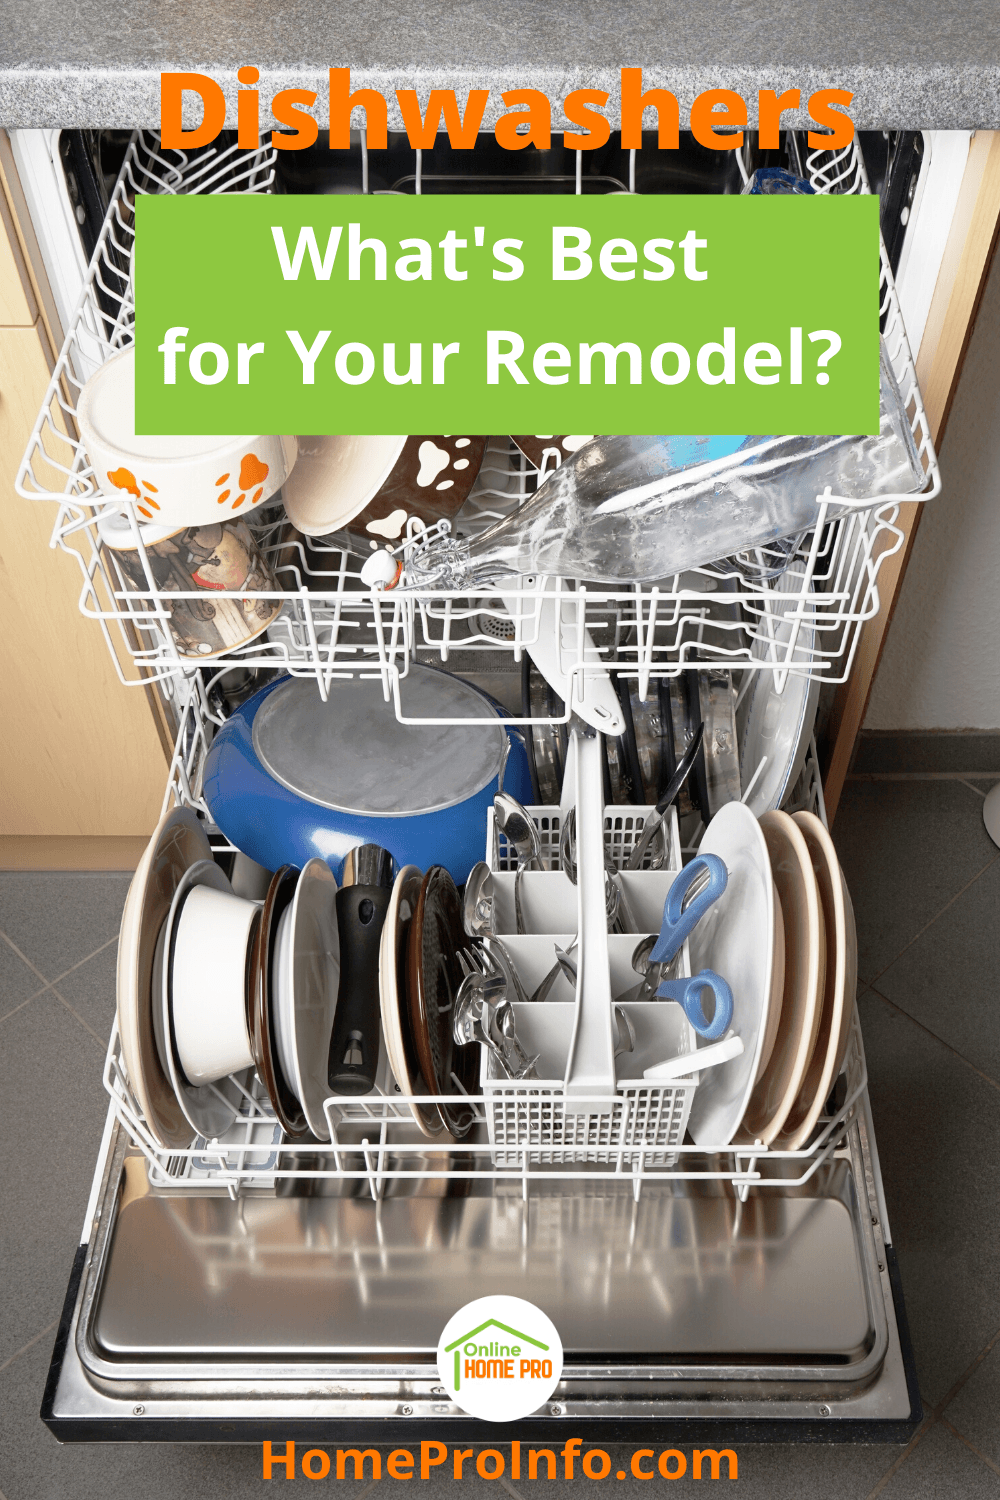 dishwashers and remodeling